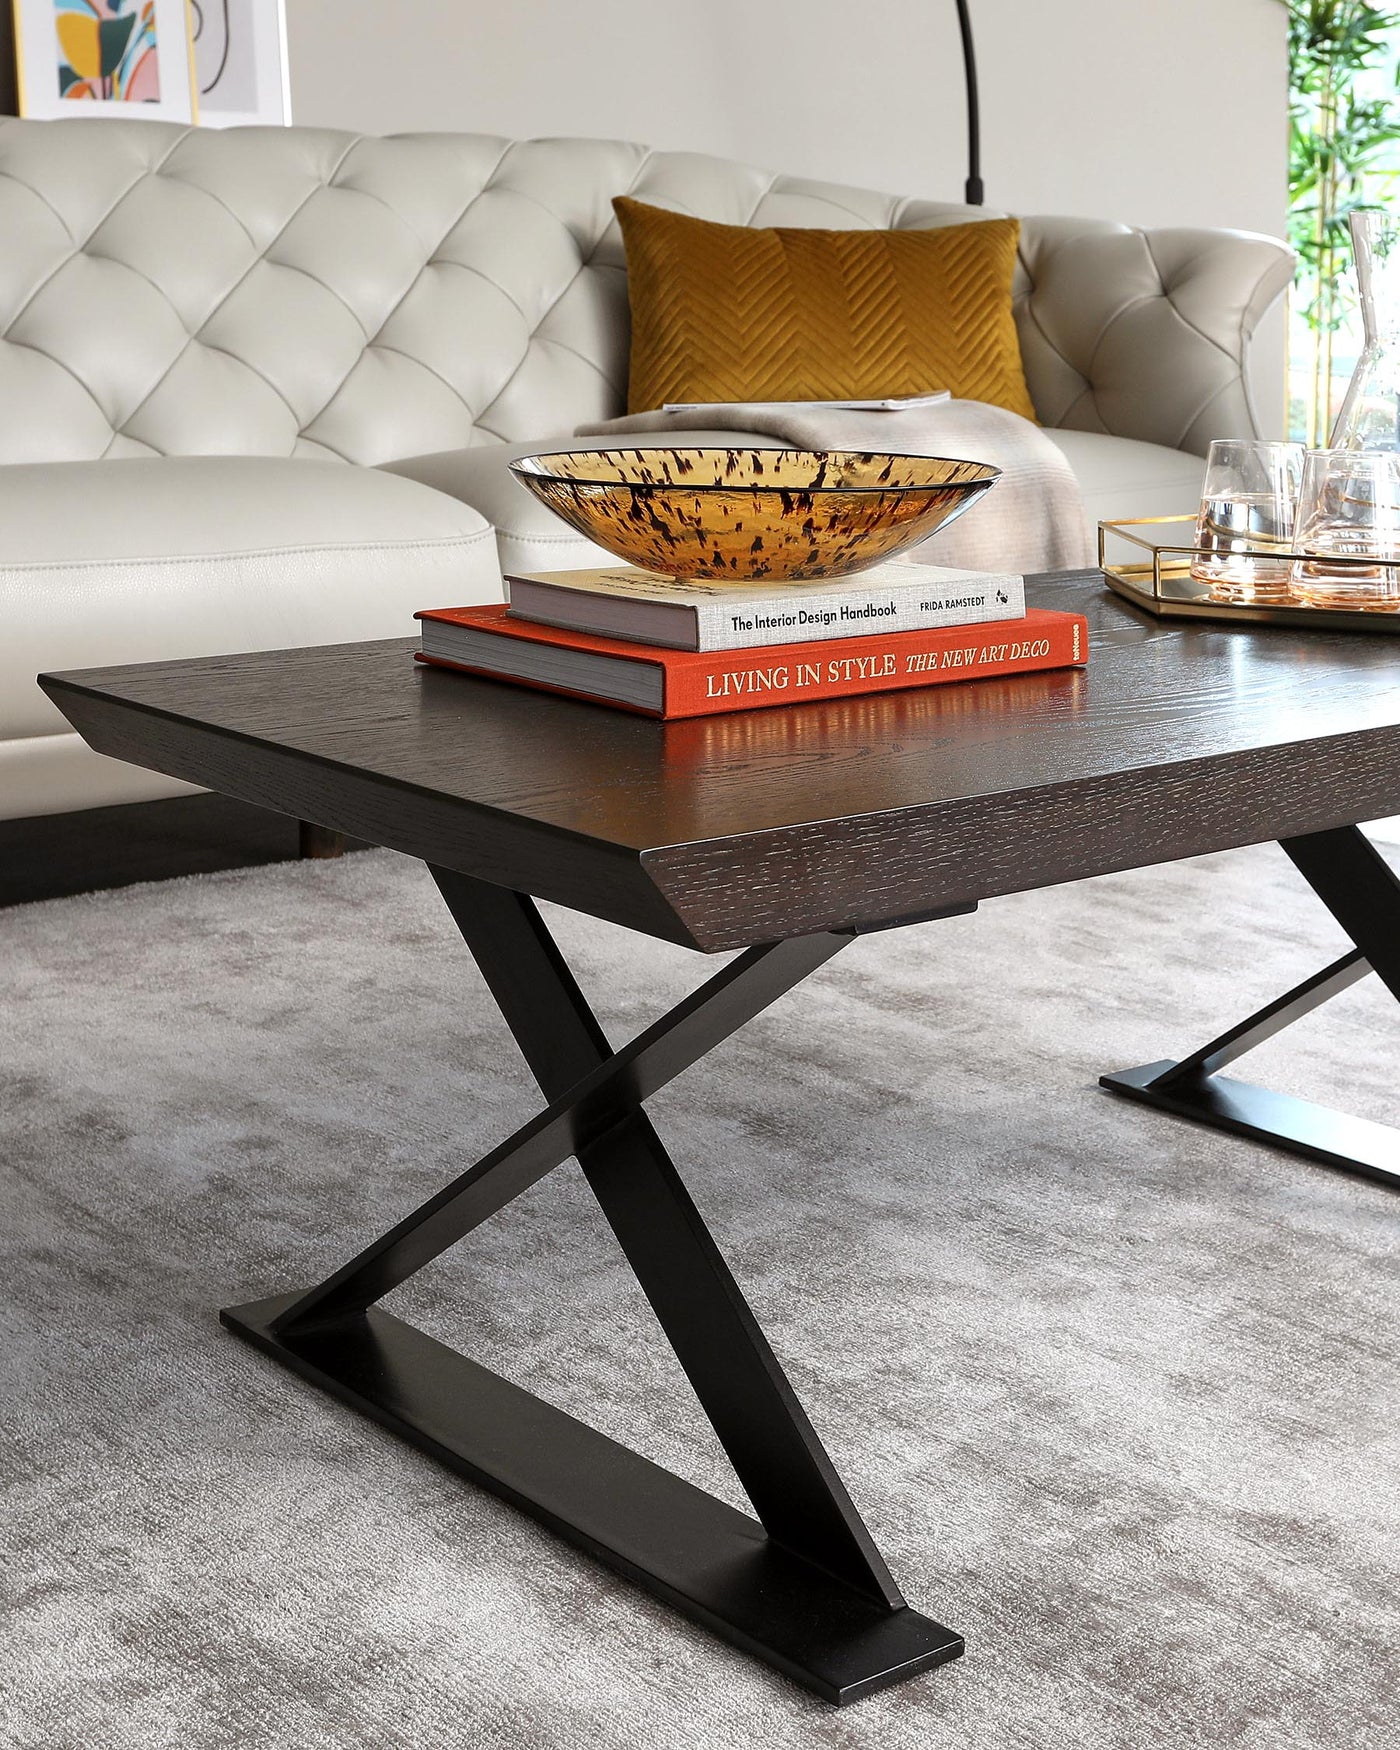 Modern coffee table with dark wood finish and distinctive geometric black metal legs, placed on a plush area rug in a well-appointed living room, accessorized with decorative books and an ornamental bowl.